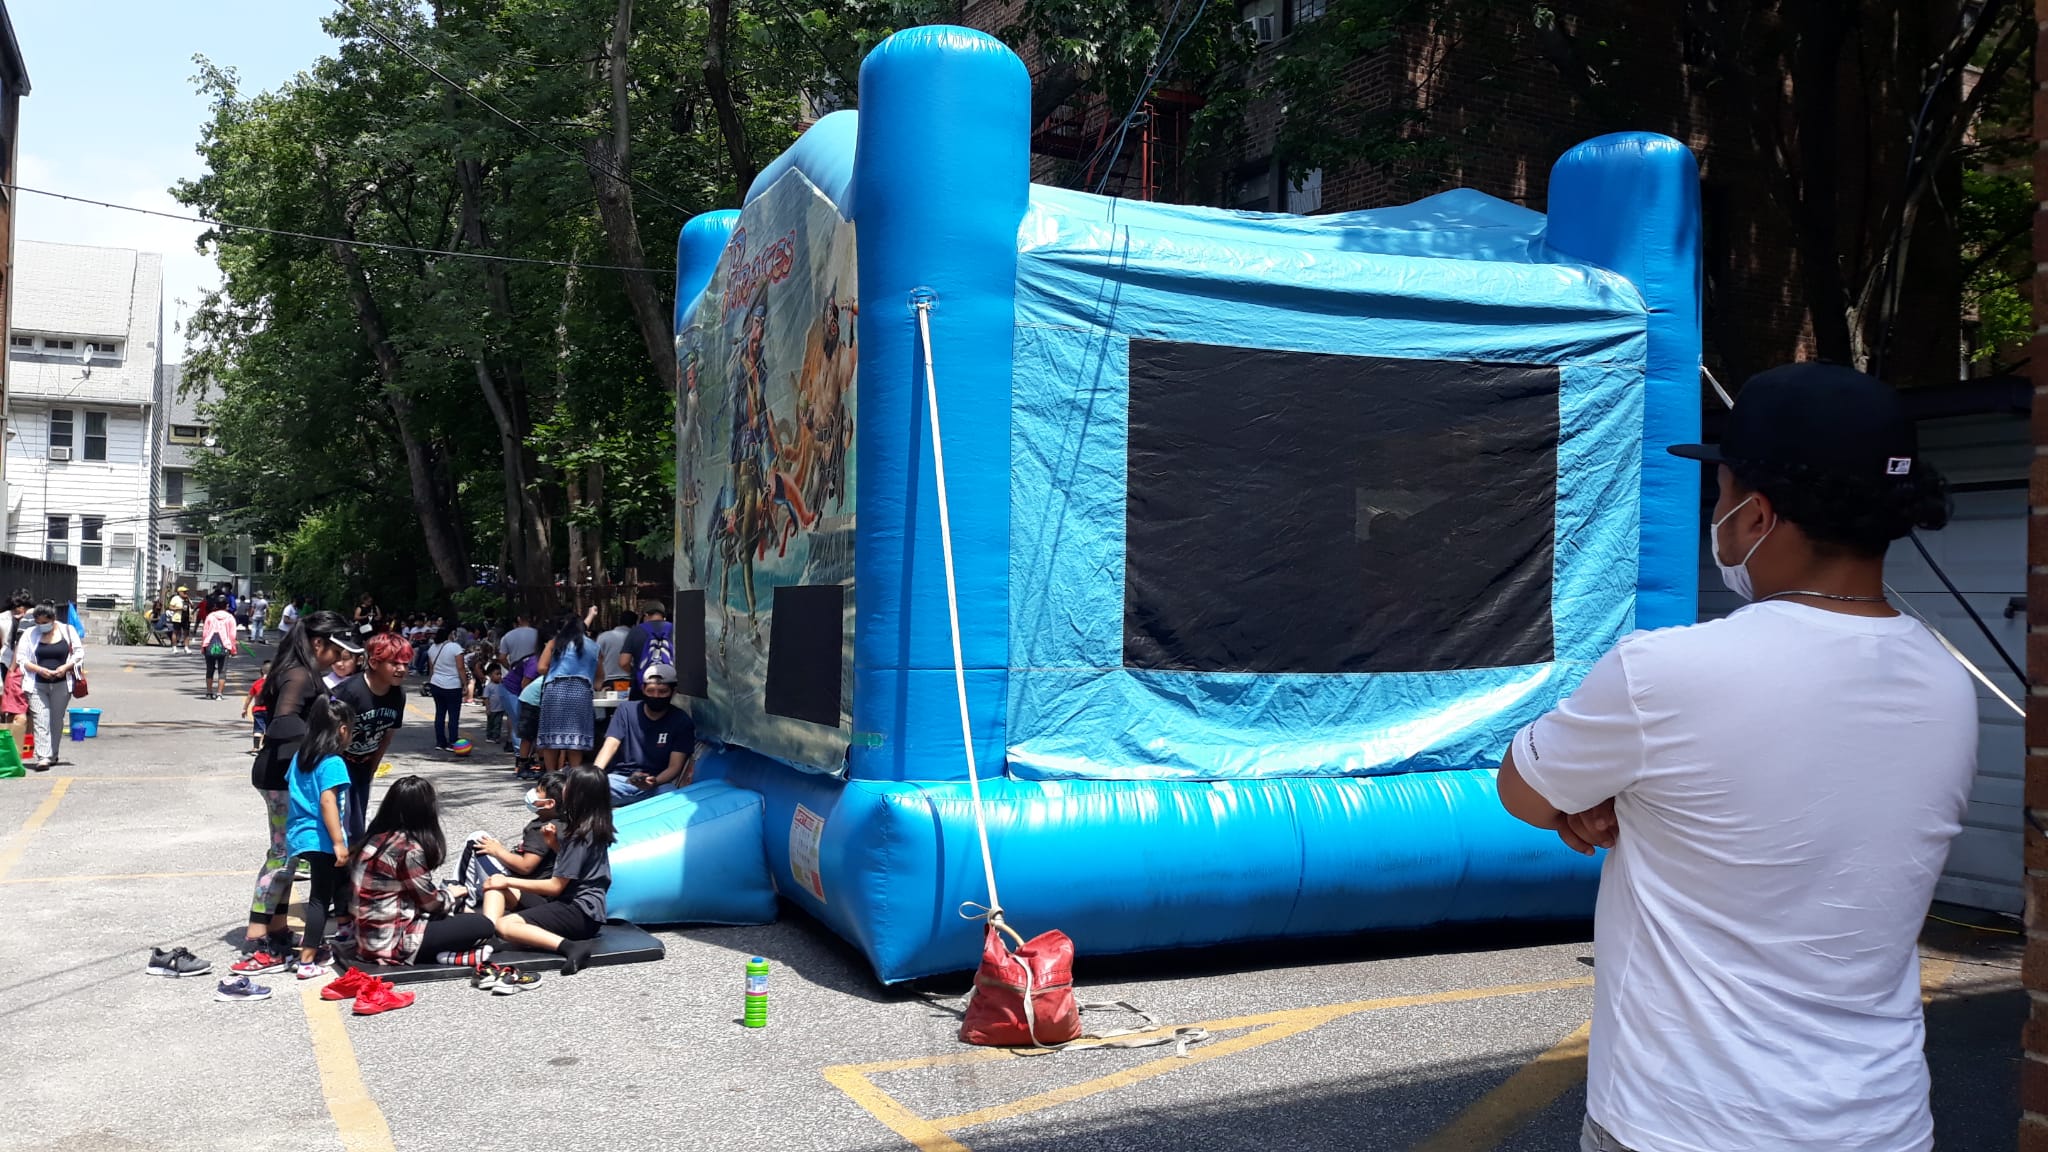 A blue inflatable bounce house with people sitting on it.